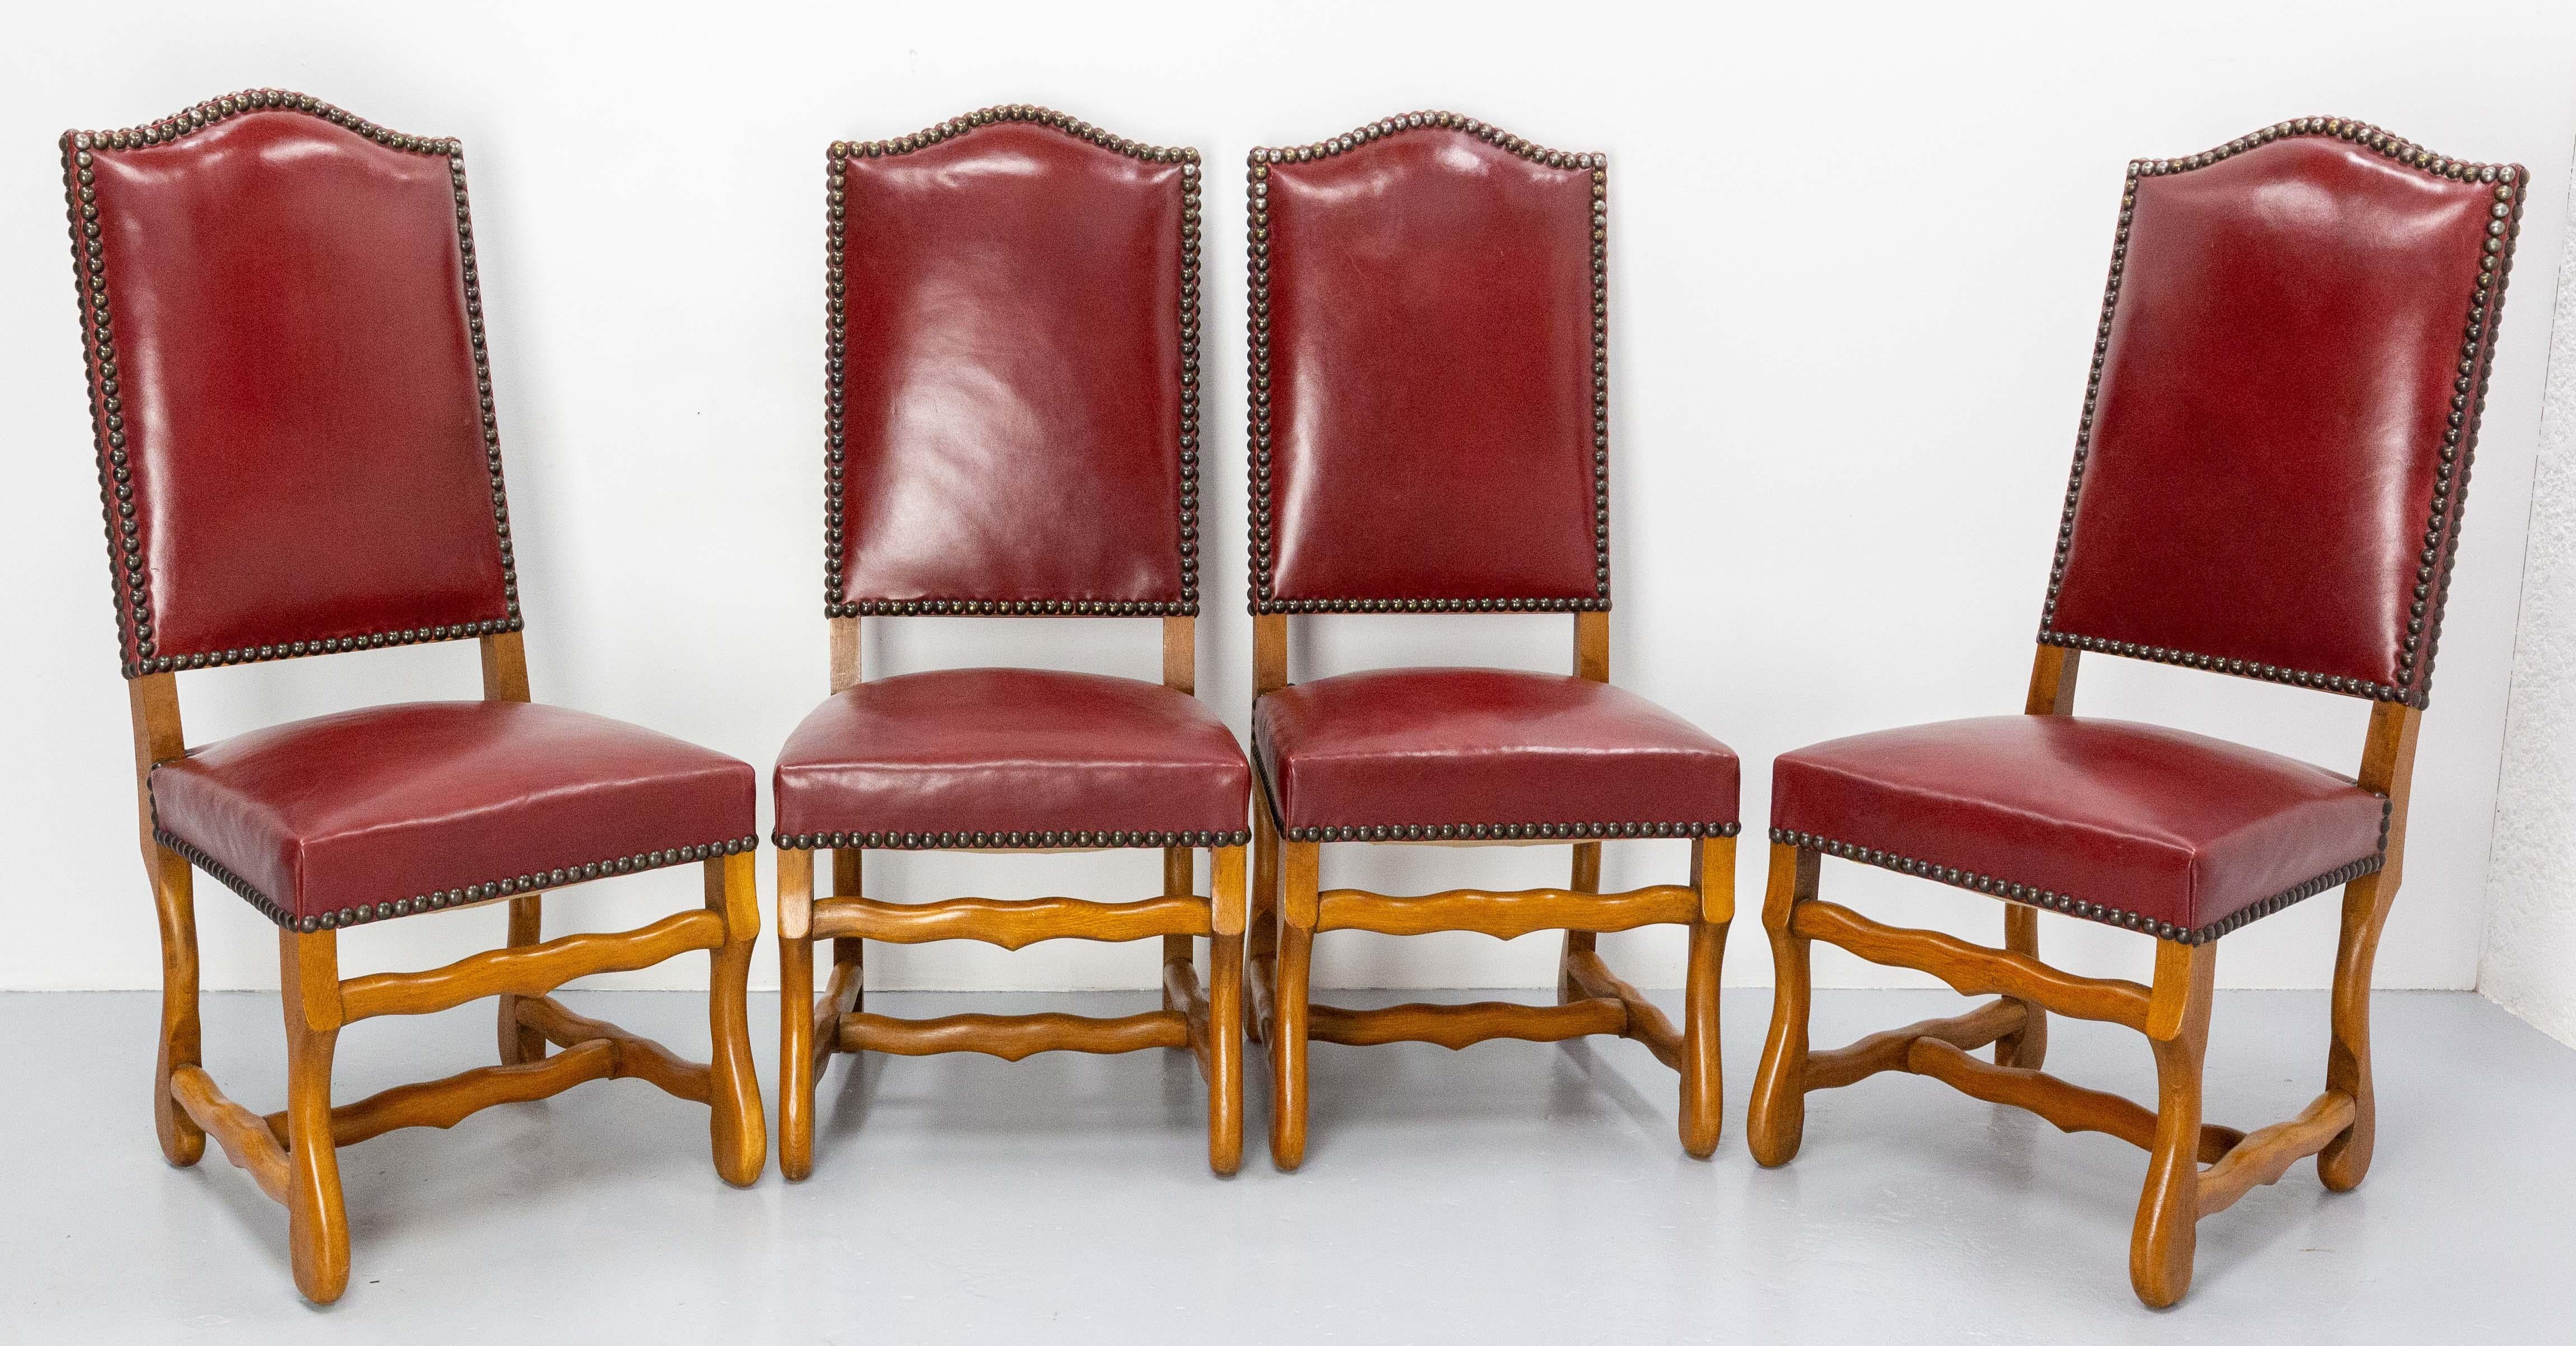 Four dining chairs in the Louis XIII style made circa 1960.
Red leather and studs, oak.
Some traces of use, the chairs were little used.
Two little marks on the back on one of the chairs (please see last photo).

Shipping:
1 Pack L 100 P 76